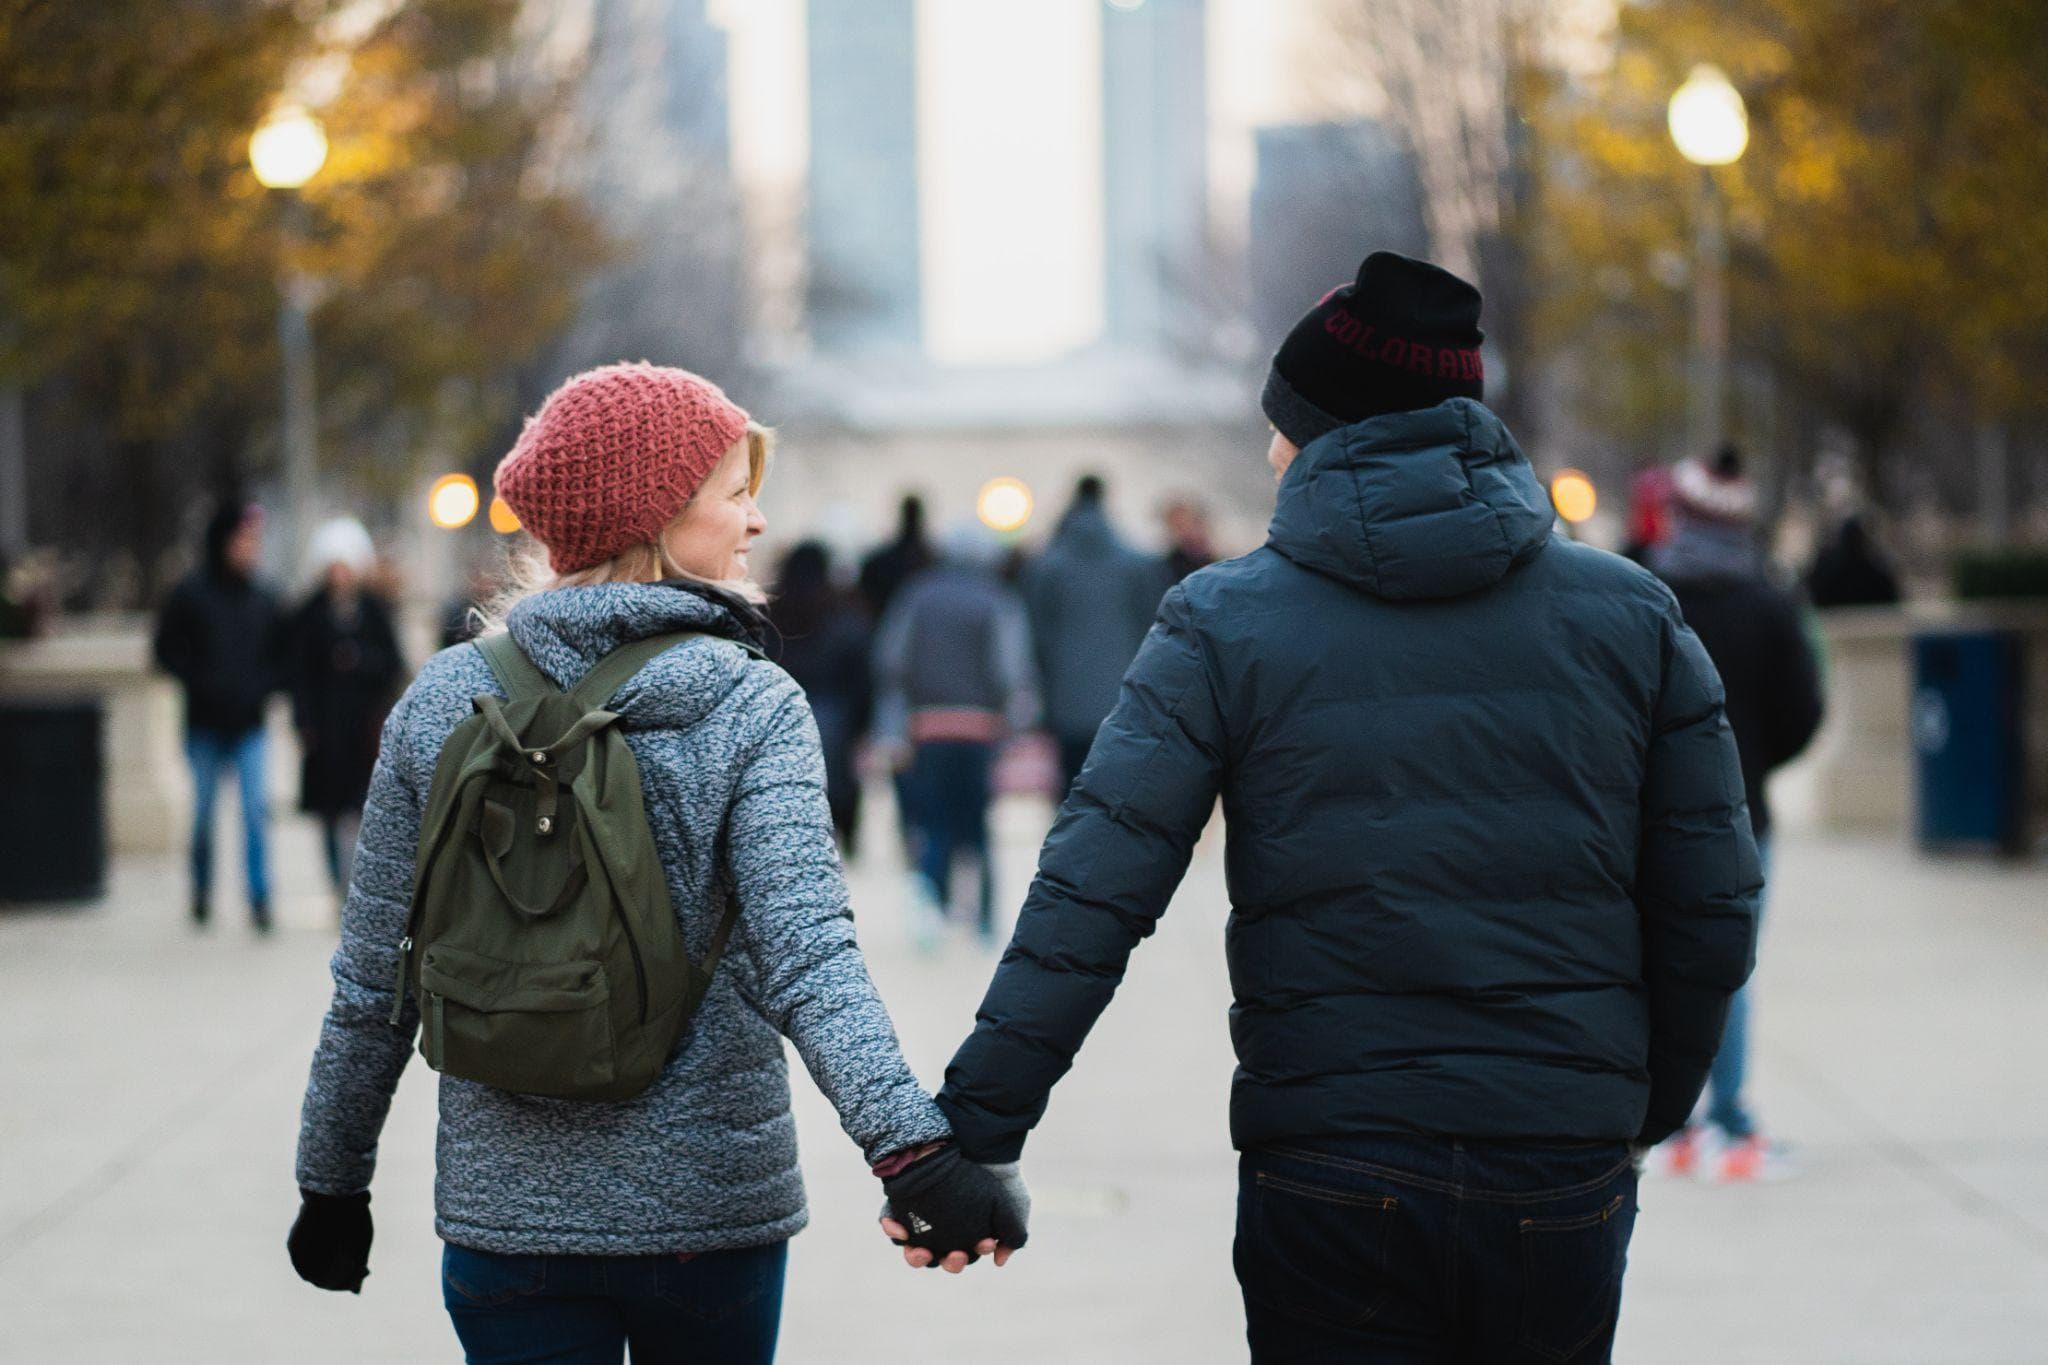 A man and woman holding hands, wearing winter clothing as they walk down a street